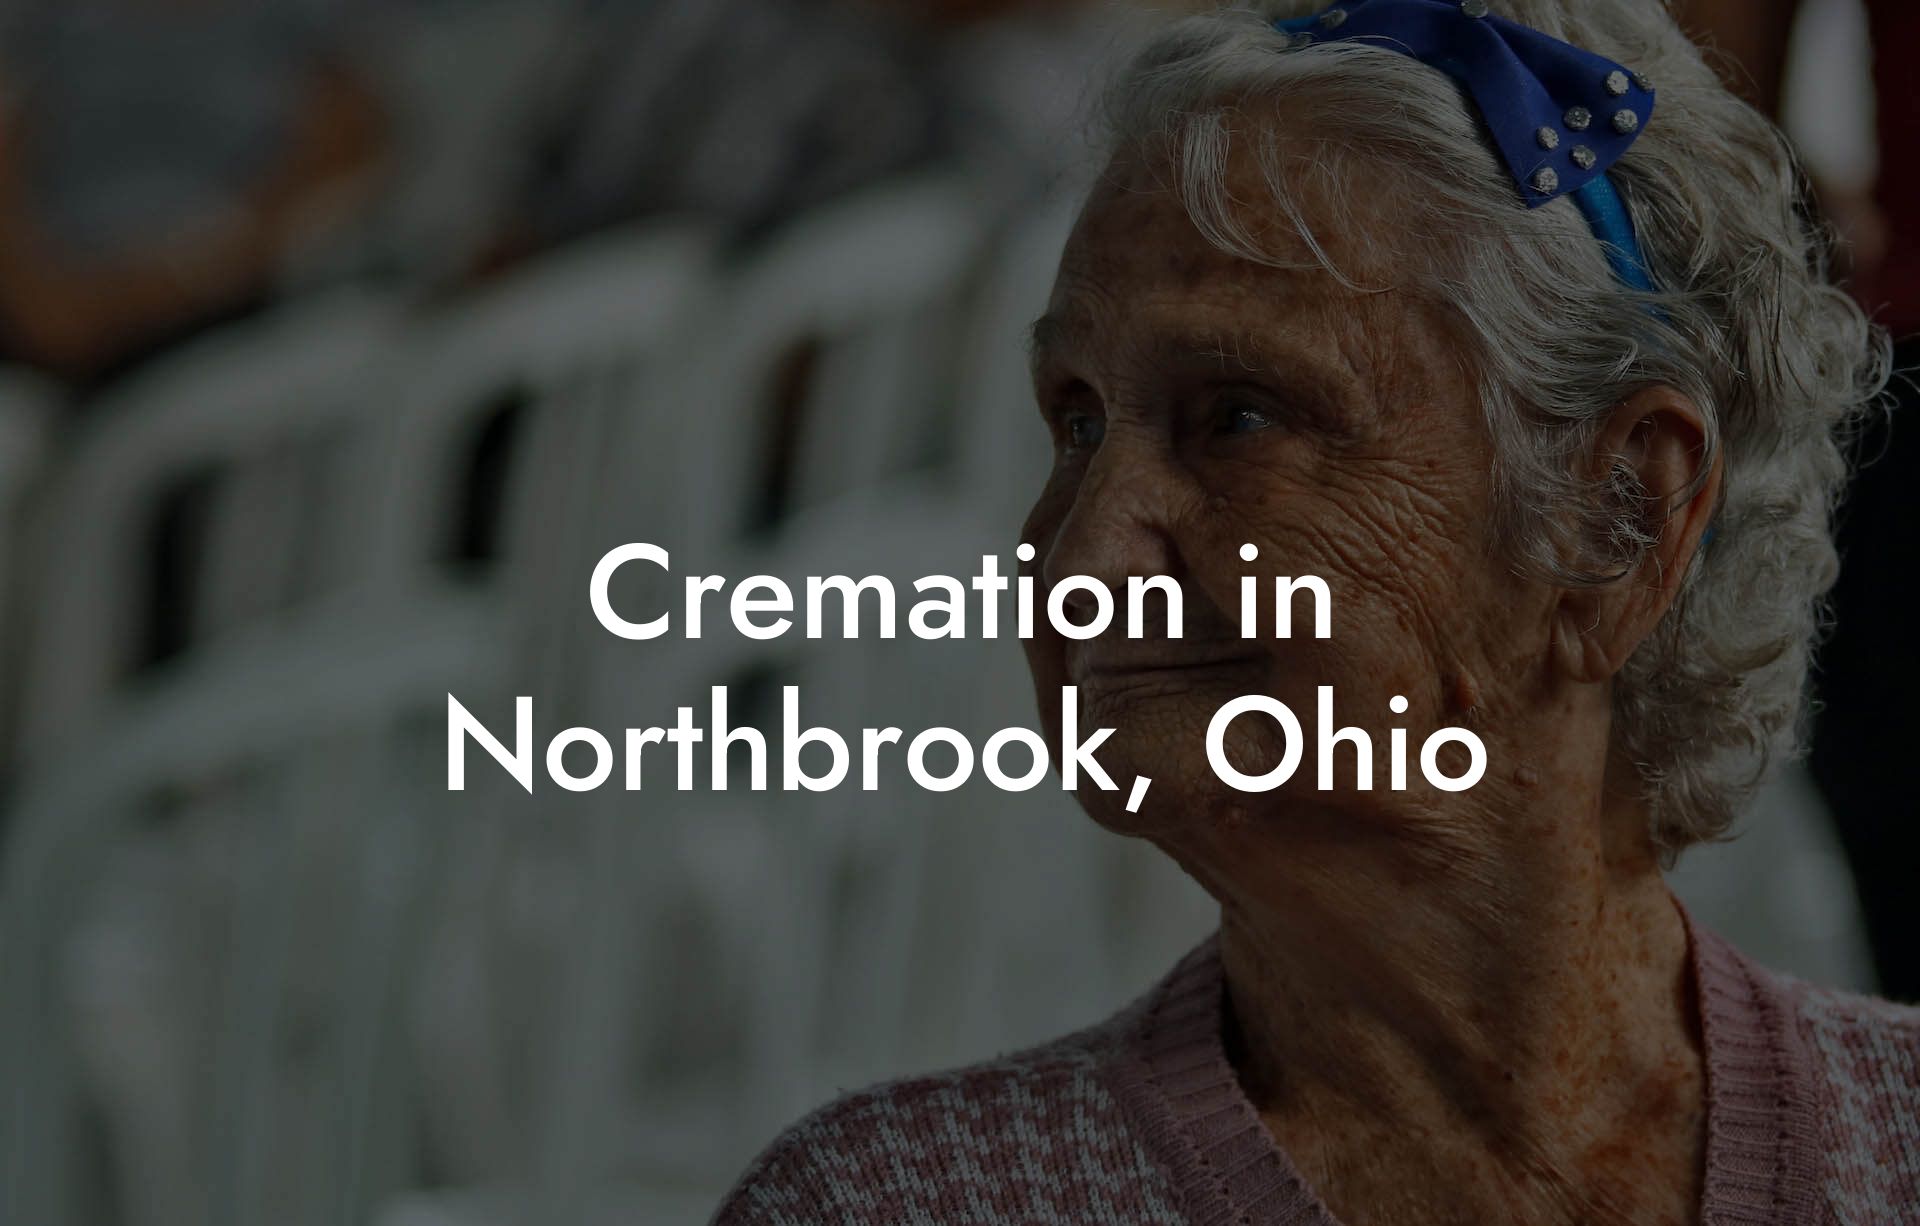 Cremation in Northbrook, Ohio